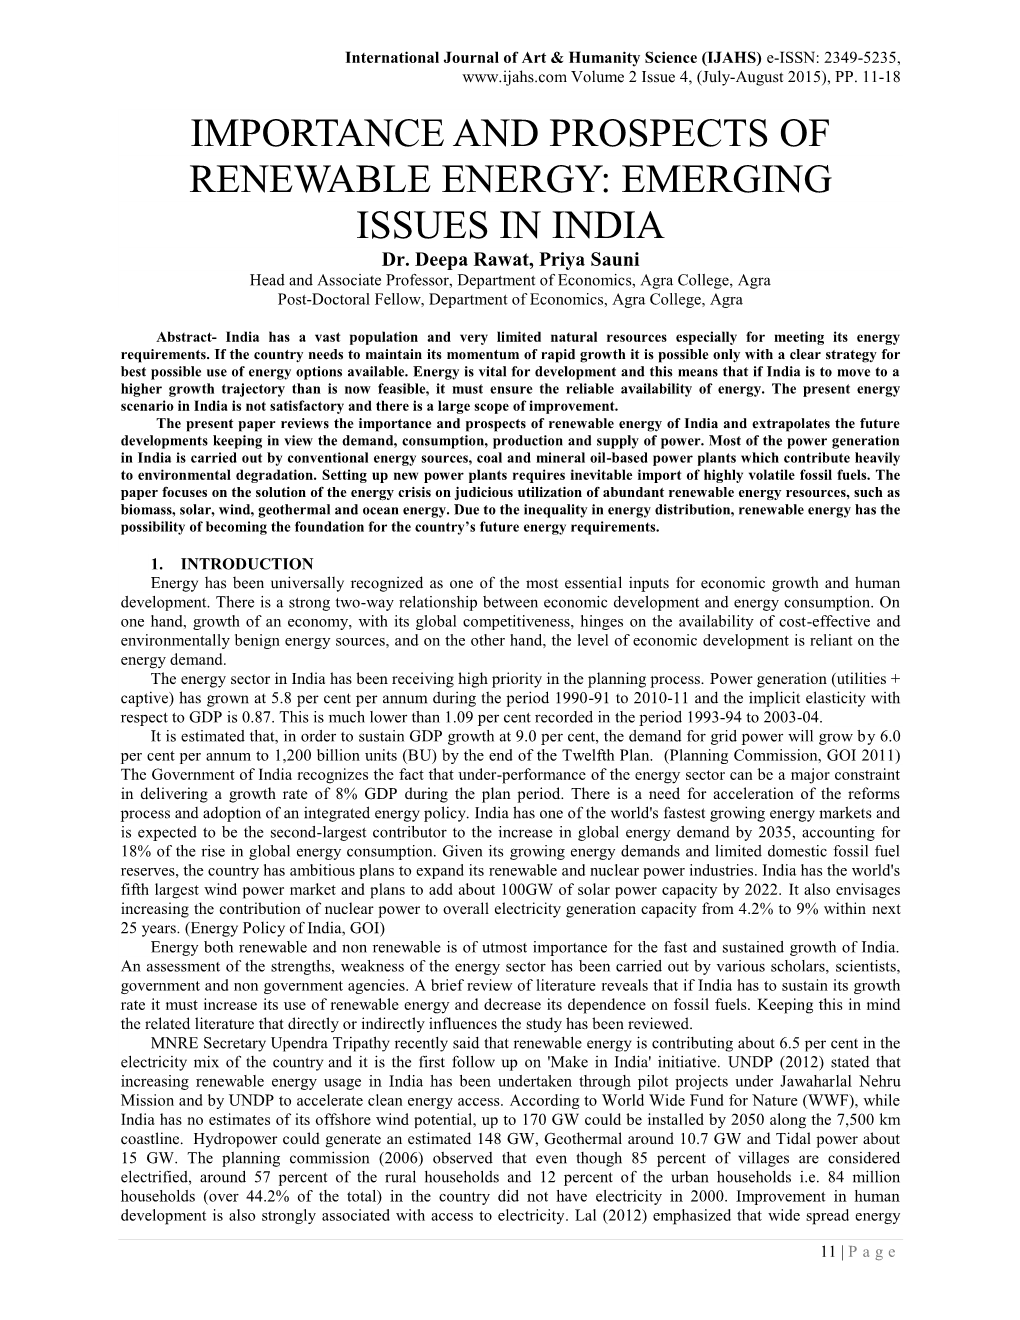 IMPORTANCE and PROSPECTS of RENEWABLE ENERGY: EMERGING ISSUES in INDIA Dr